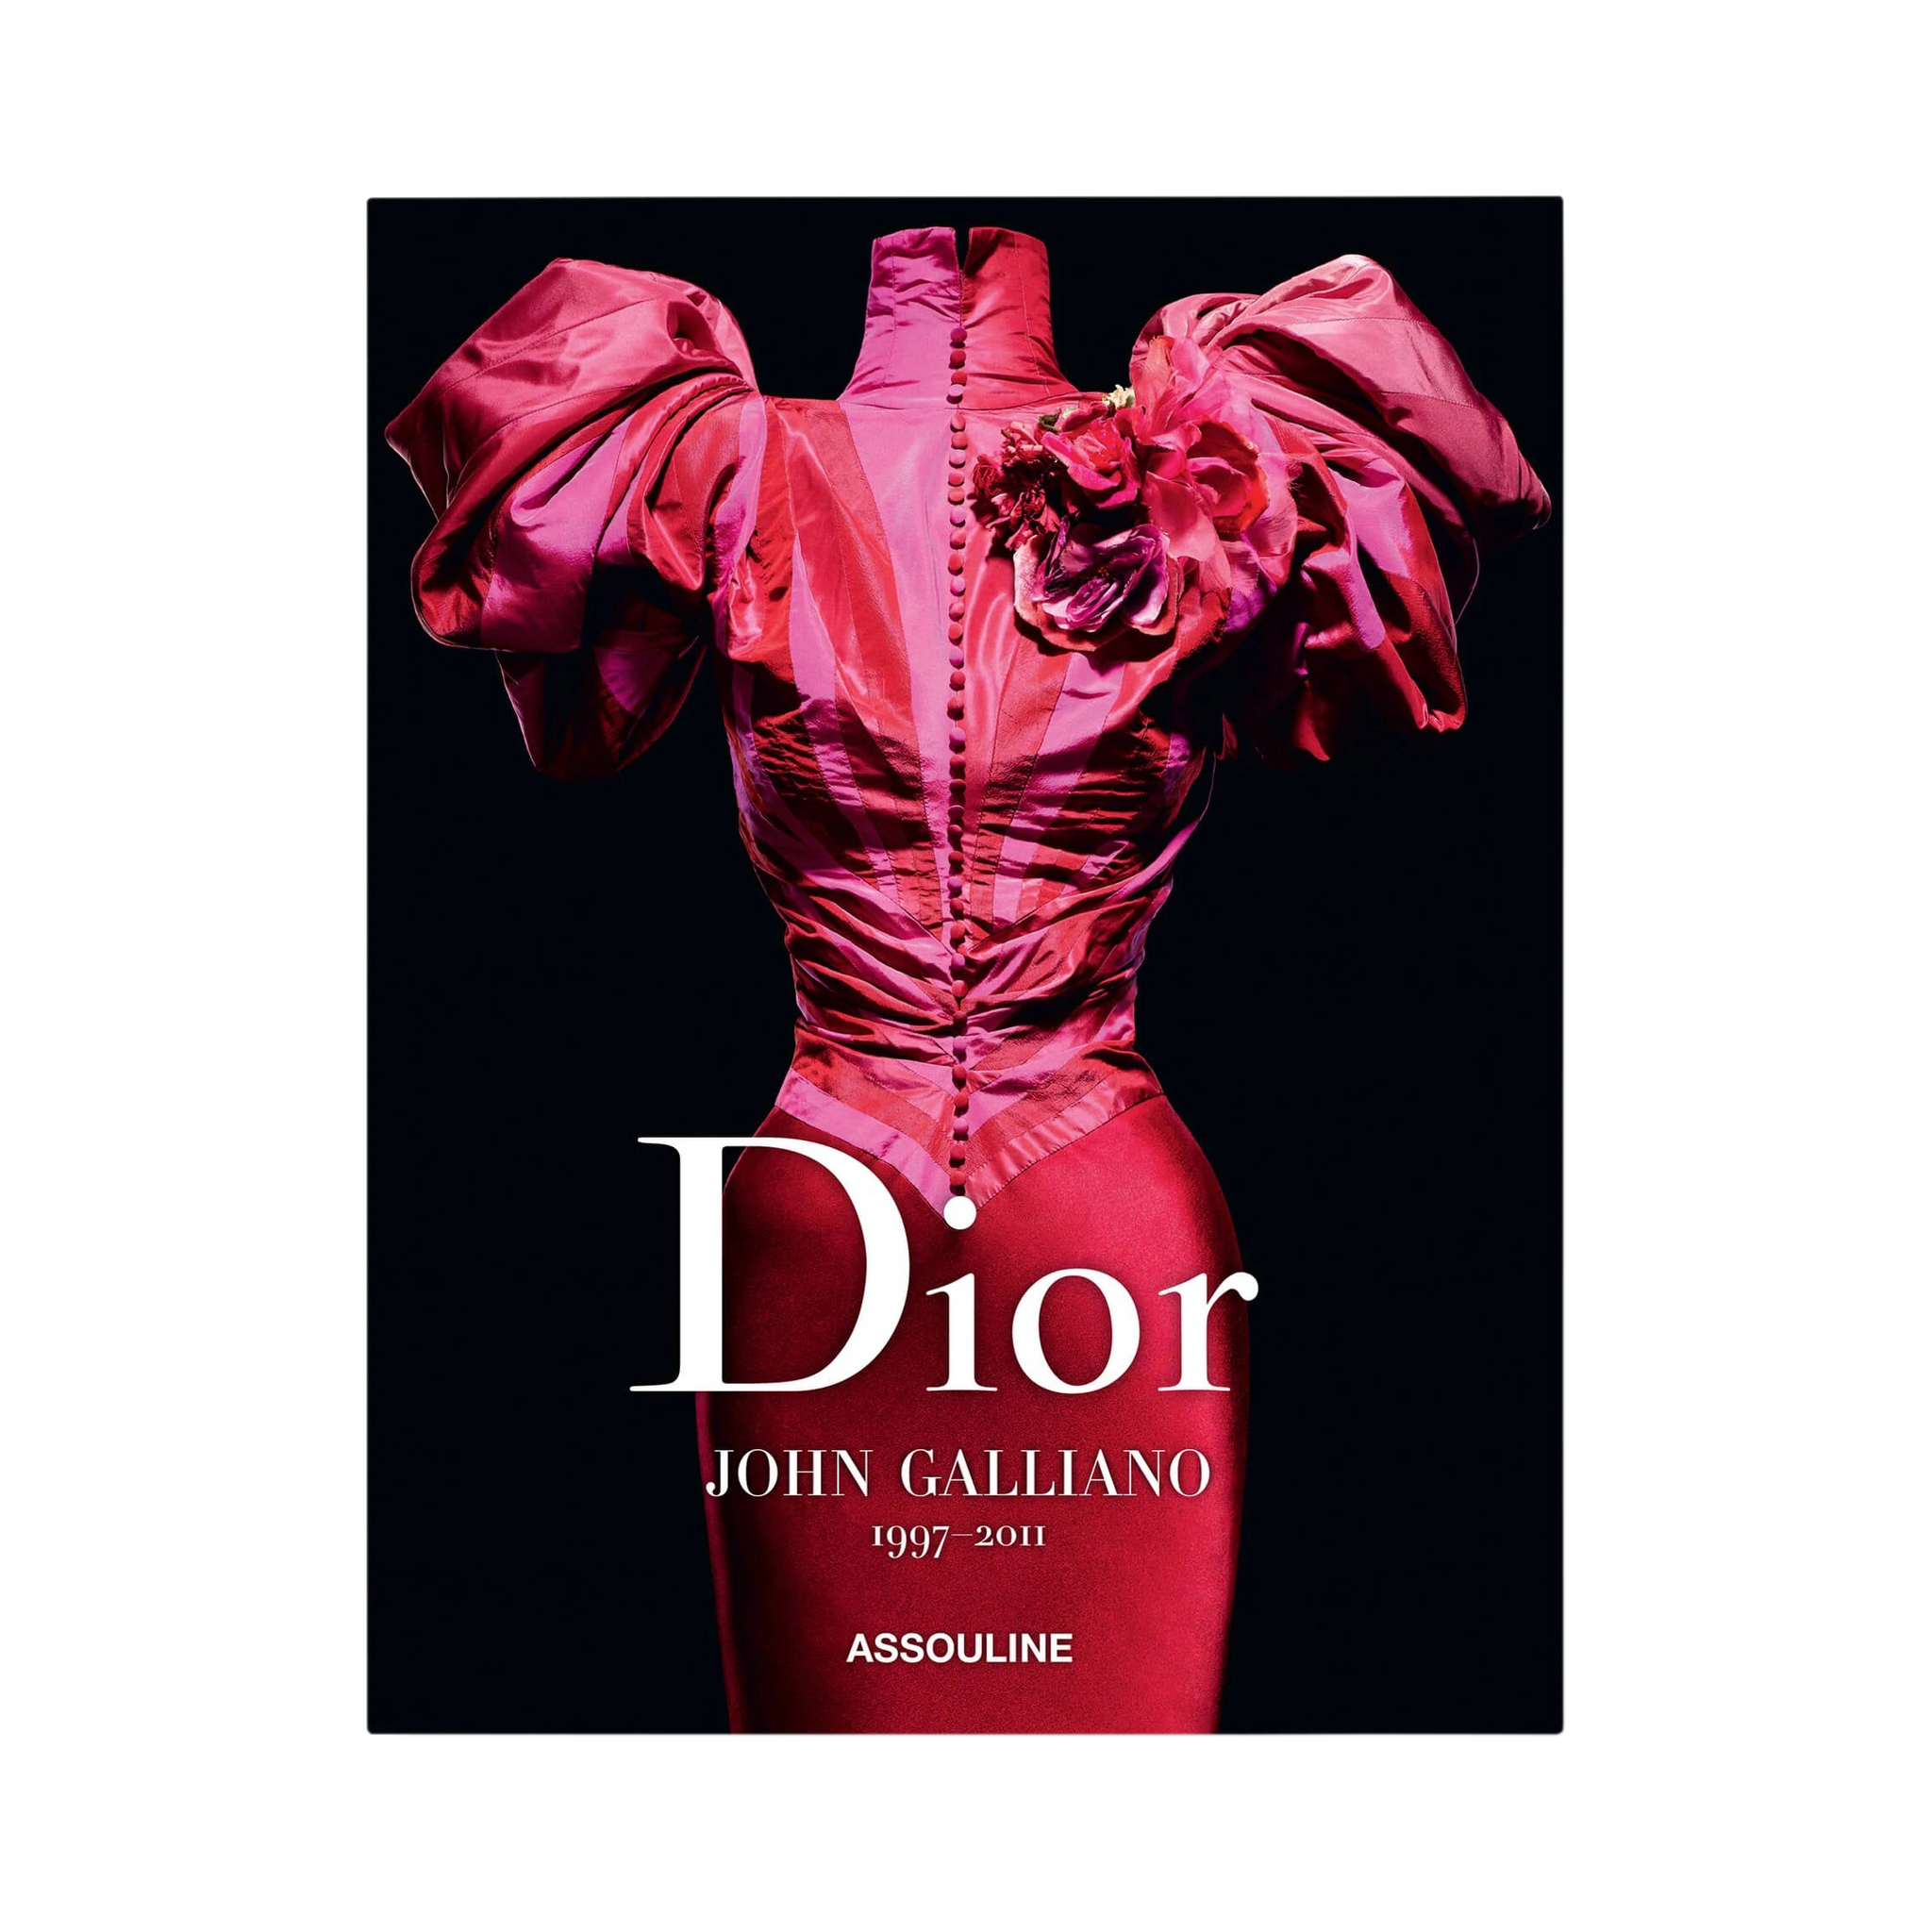 81019 Assouline Dior By John Galliano Coffee table book